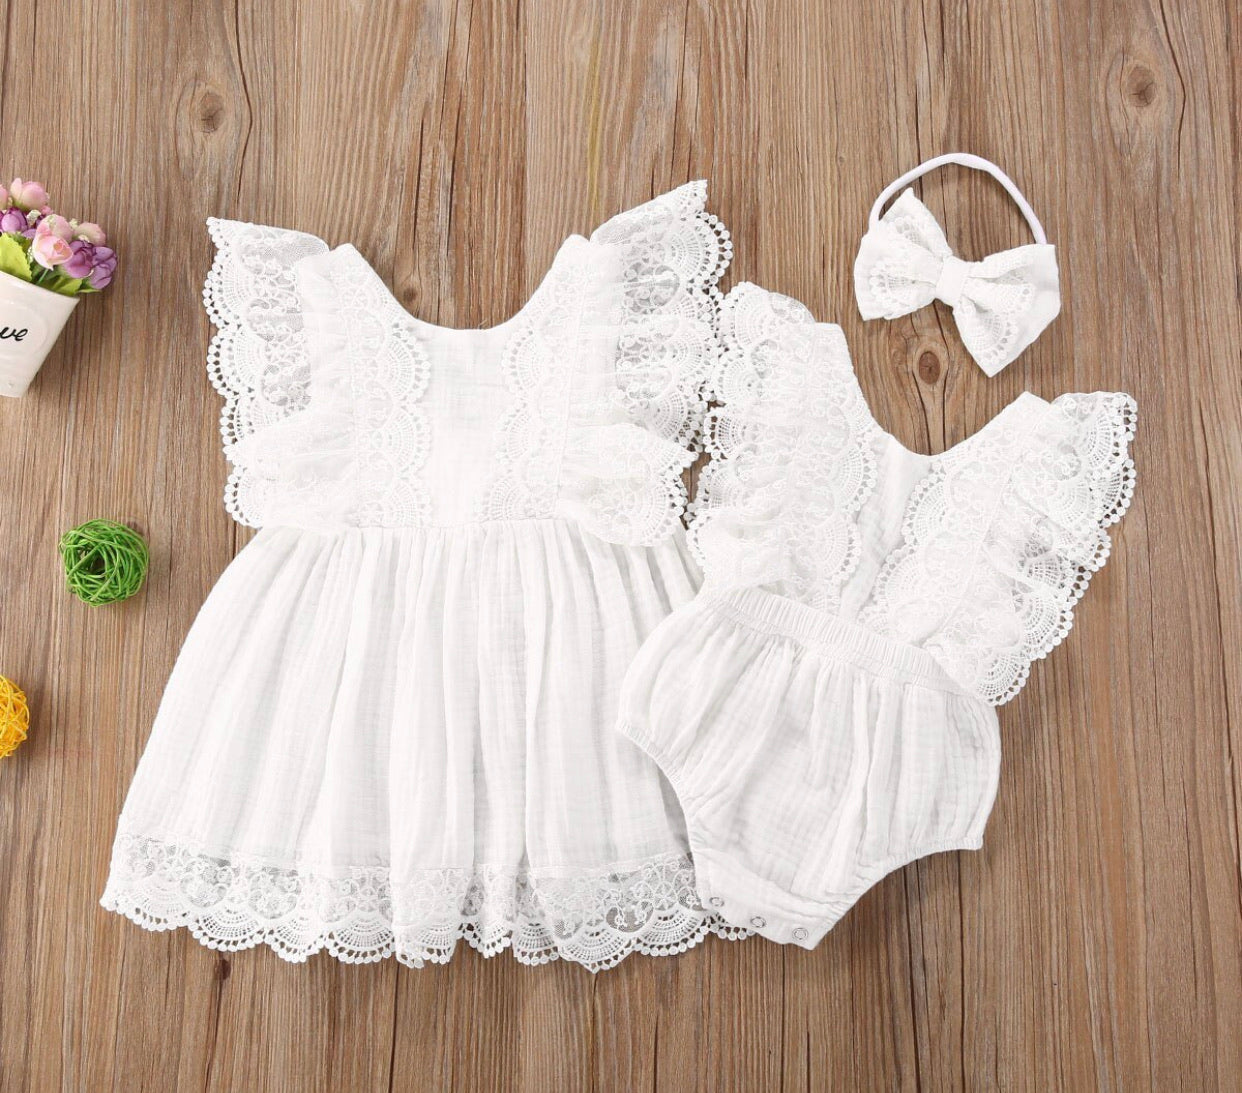 Linen and lace dress - (Matching romper available)